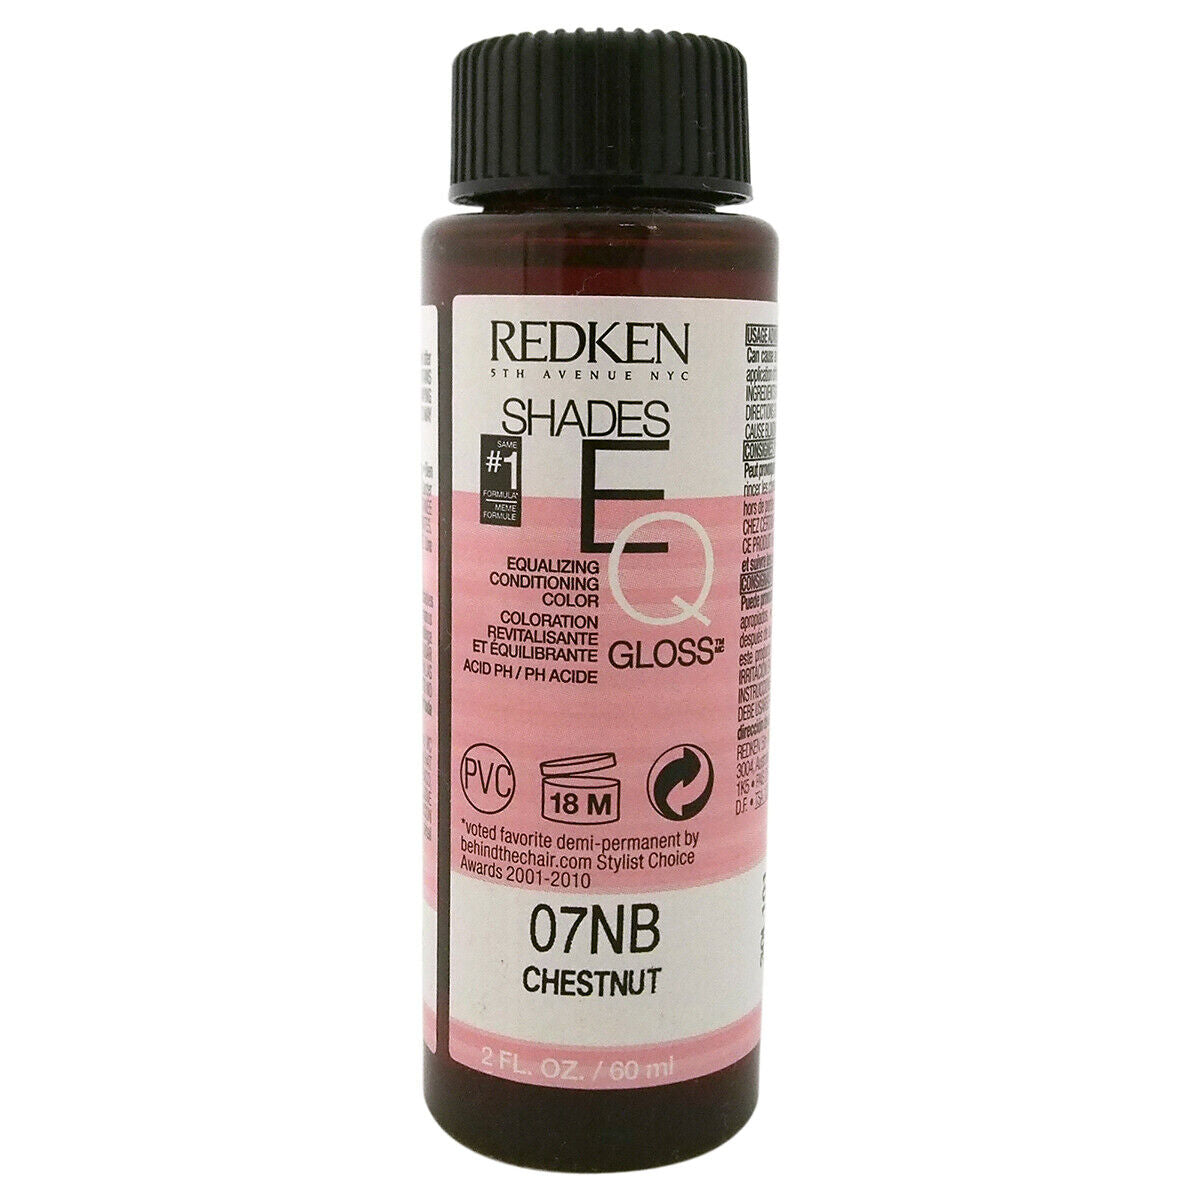 Redken Shades EQ Equalizing Conditioning Color Gloss 07nb - 60 ml / 2 oz